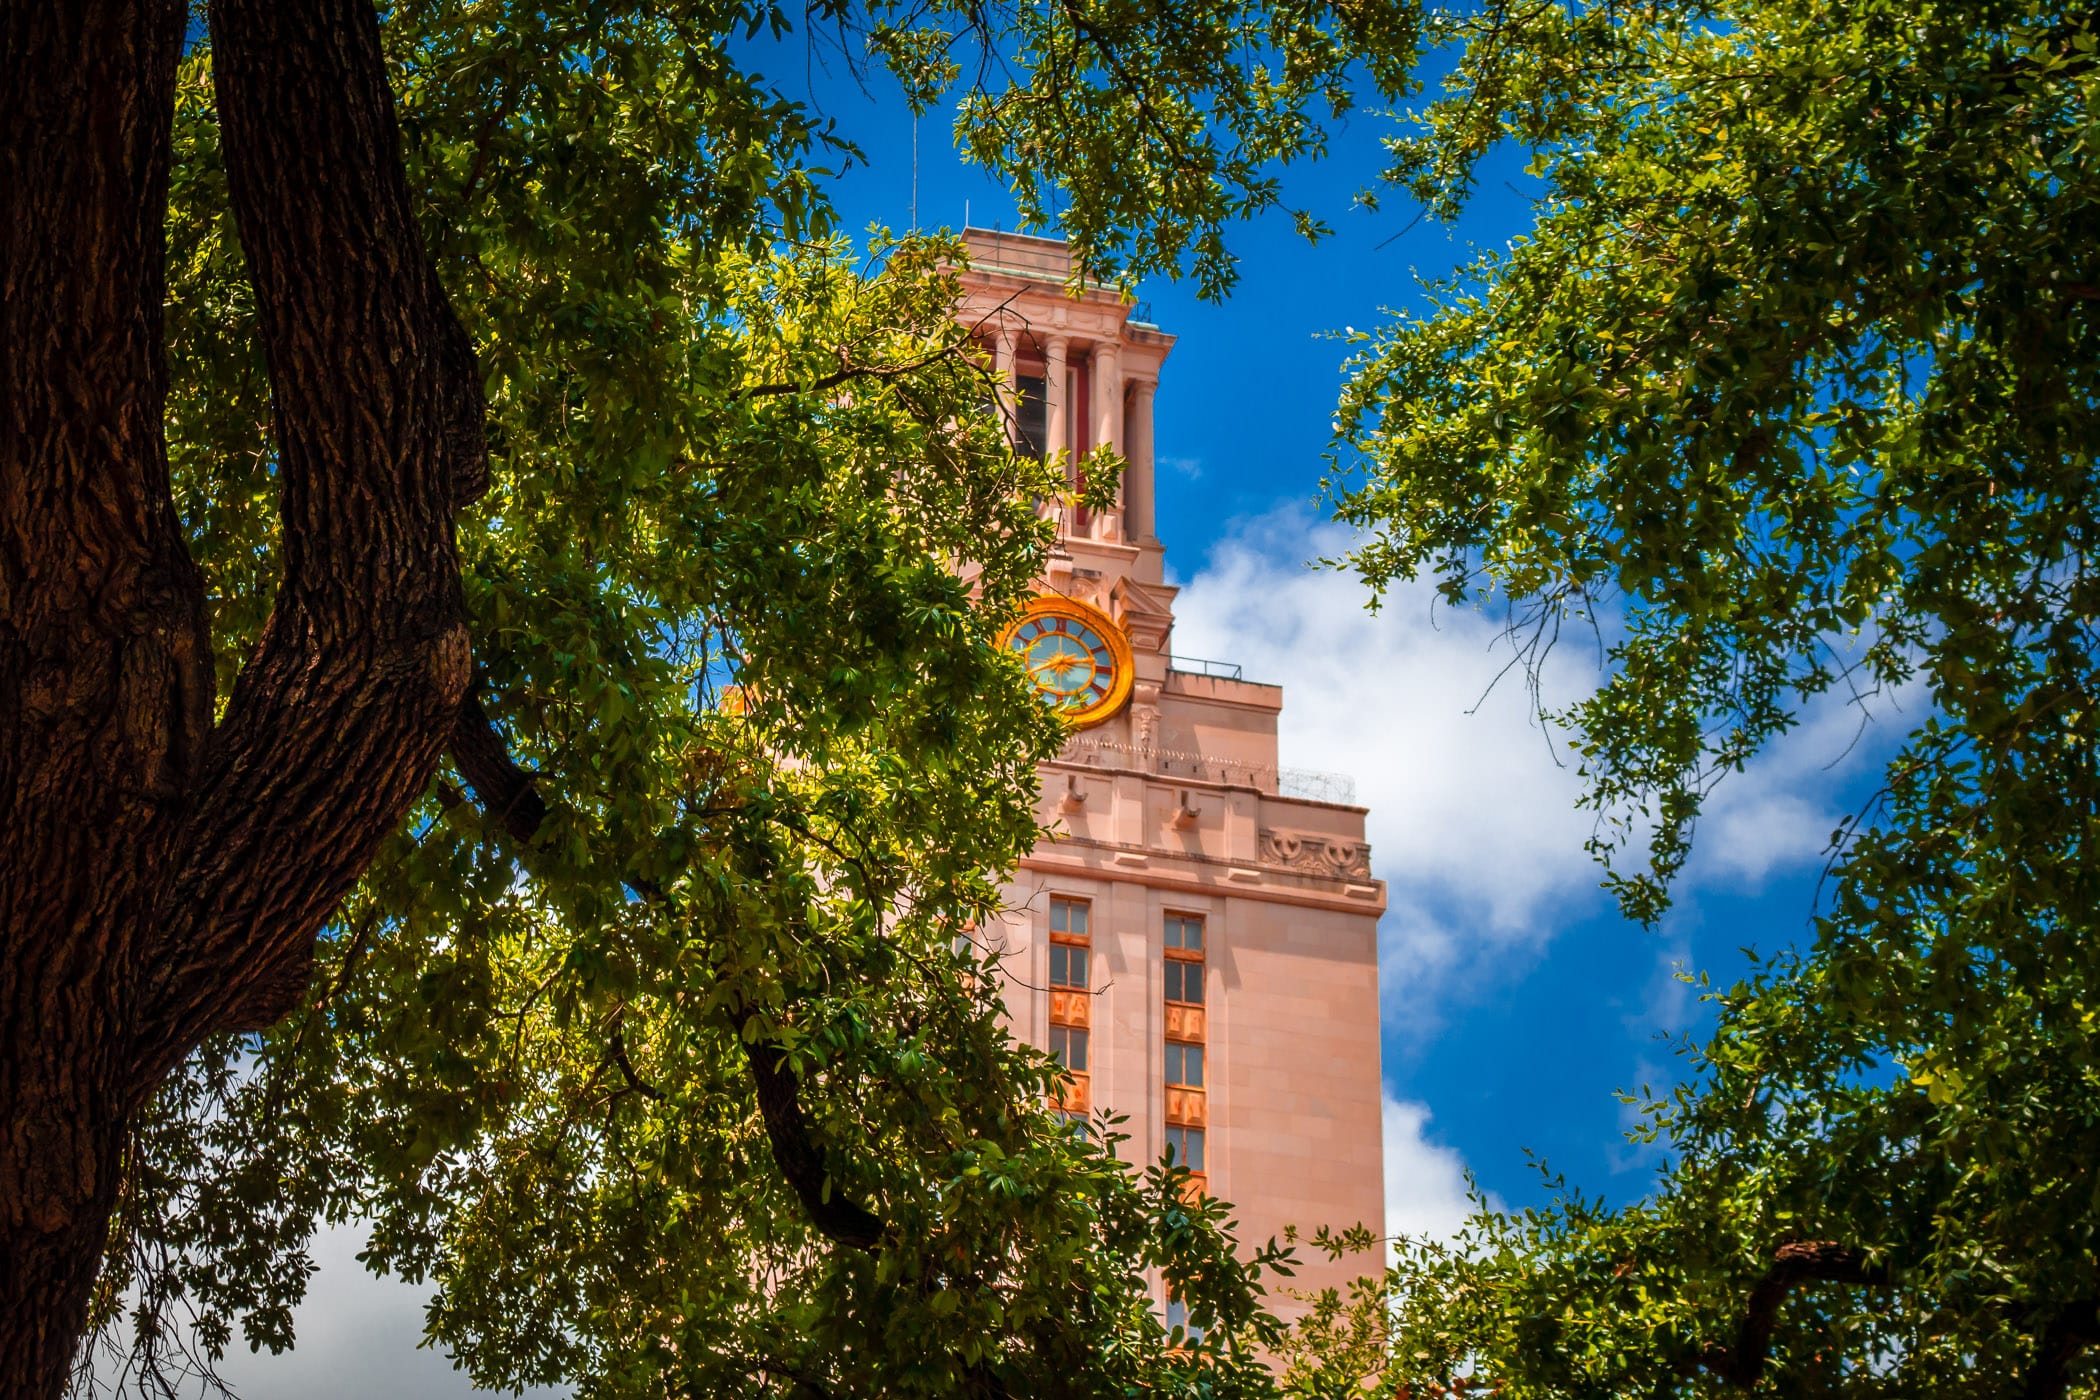 The 307-foot-tall Main Building at the University of Texas at Austin appears to hide behind a nearby grove of trees.